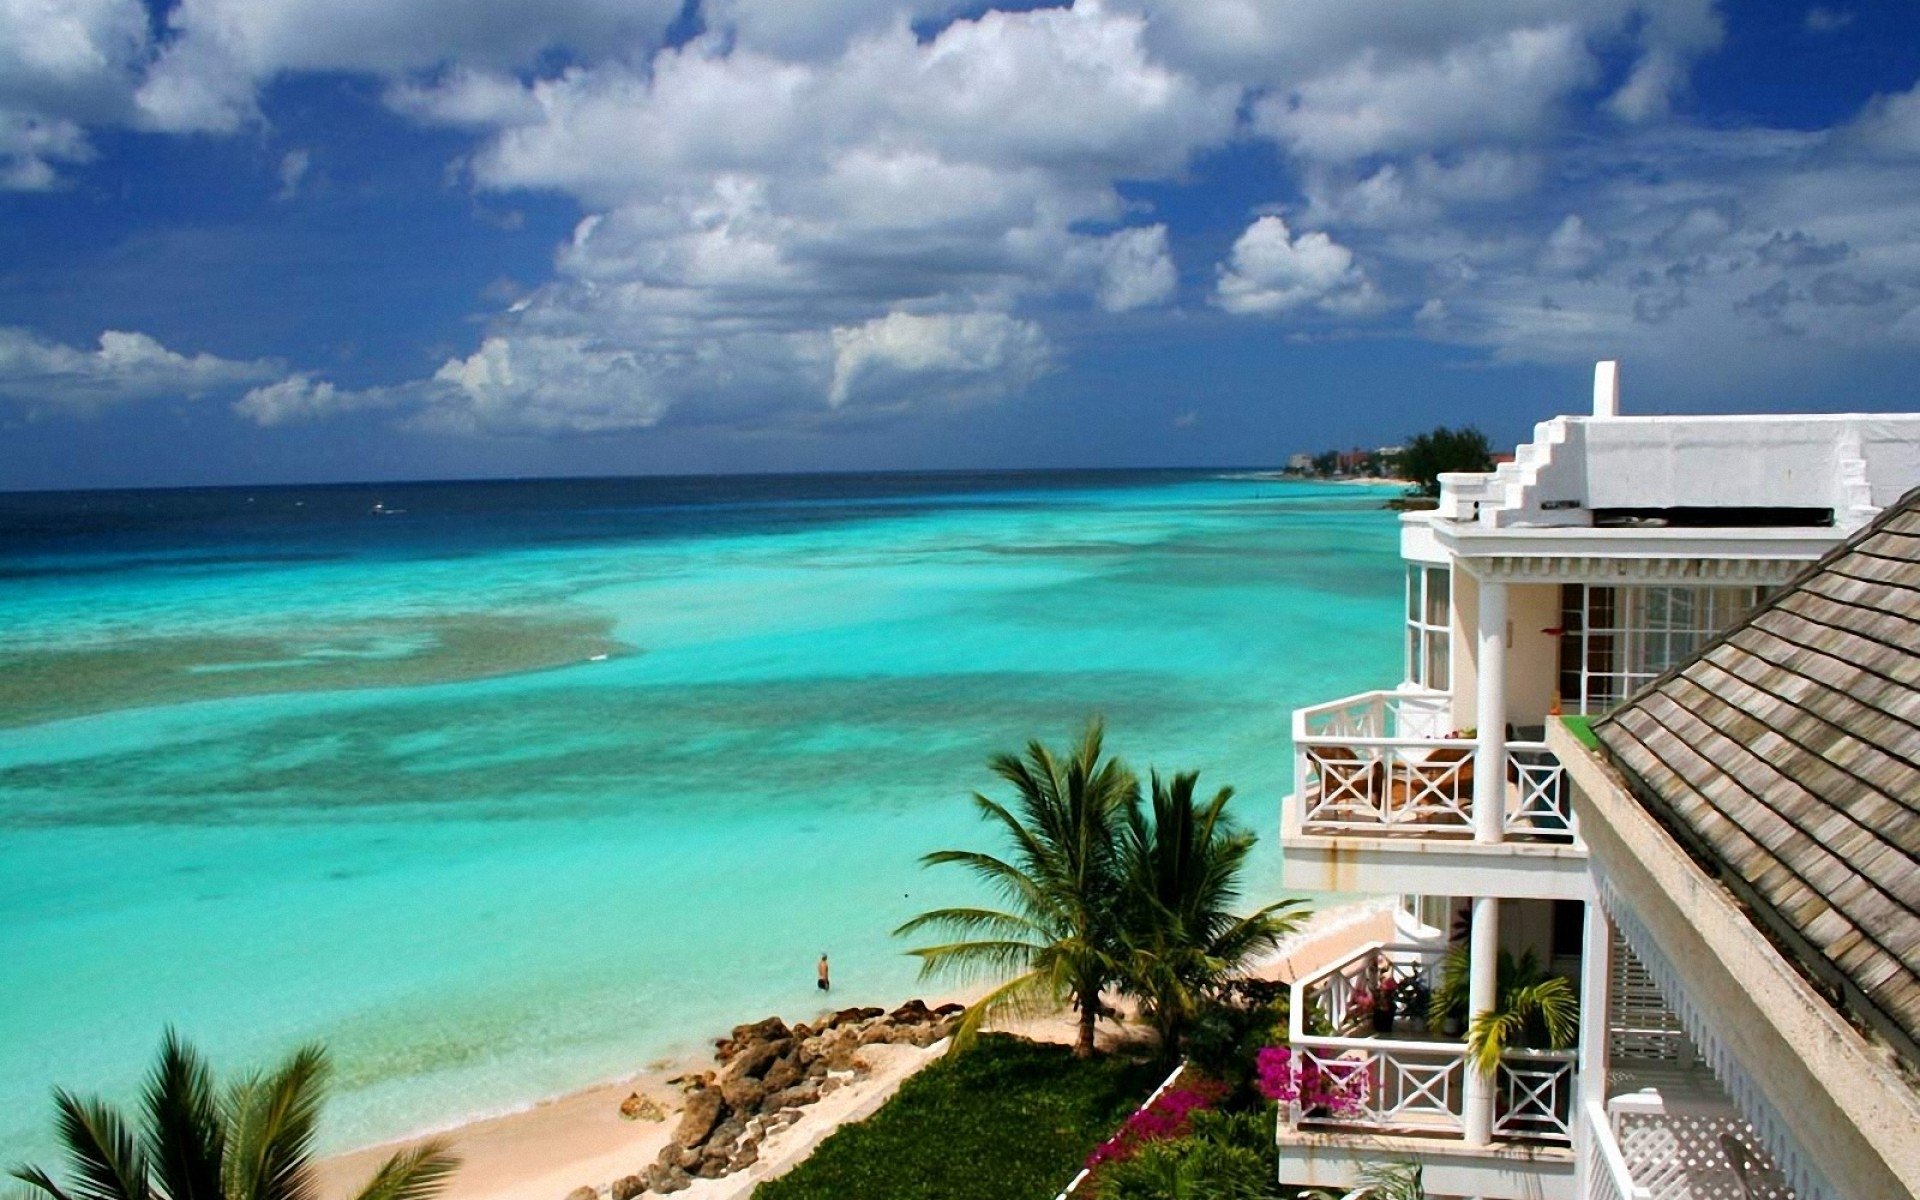 House On The Beach In Barbados HD Wallpaper Background Image